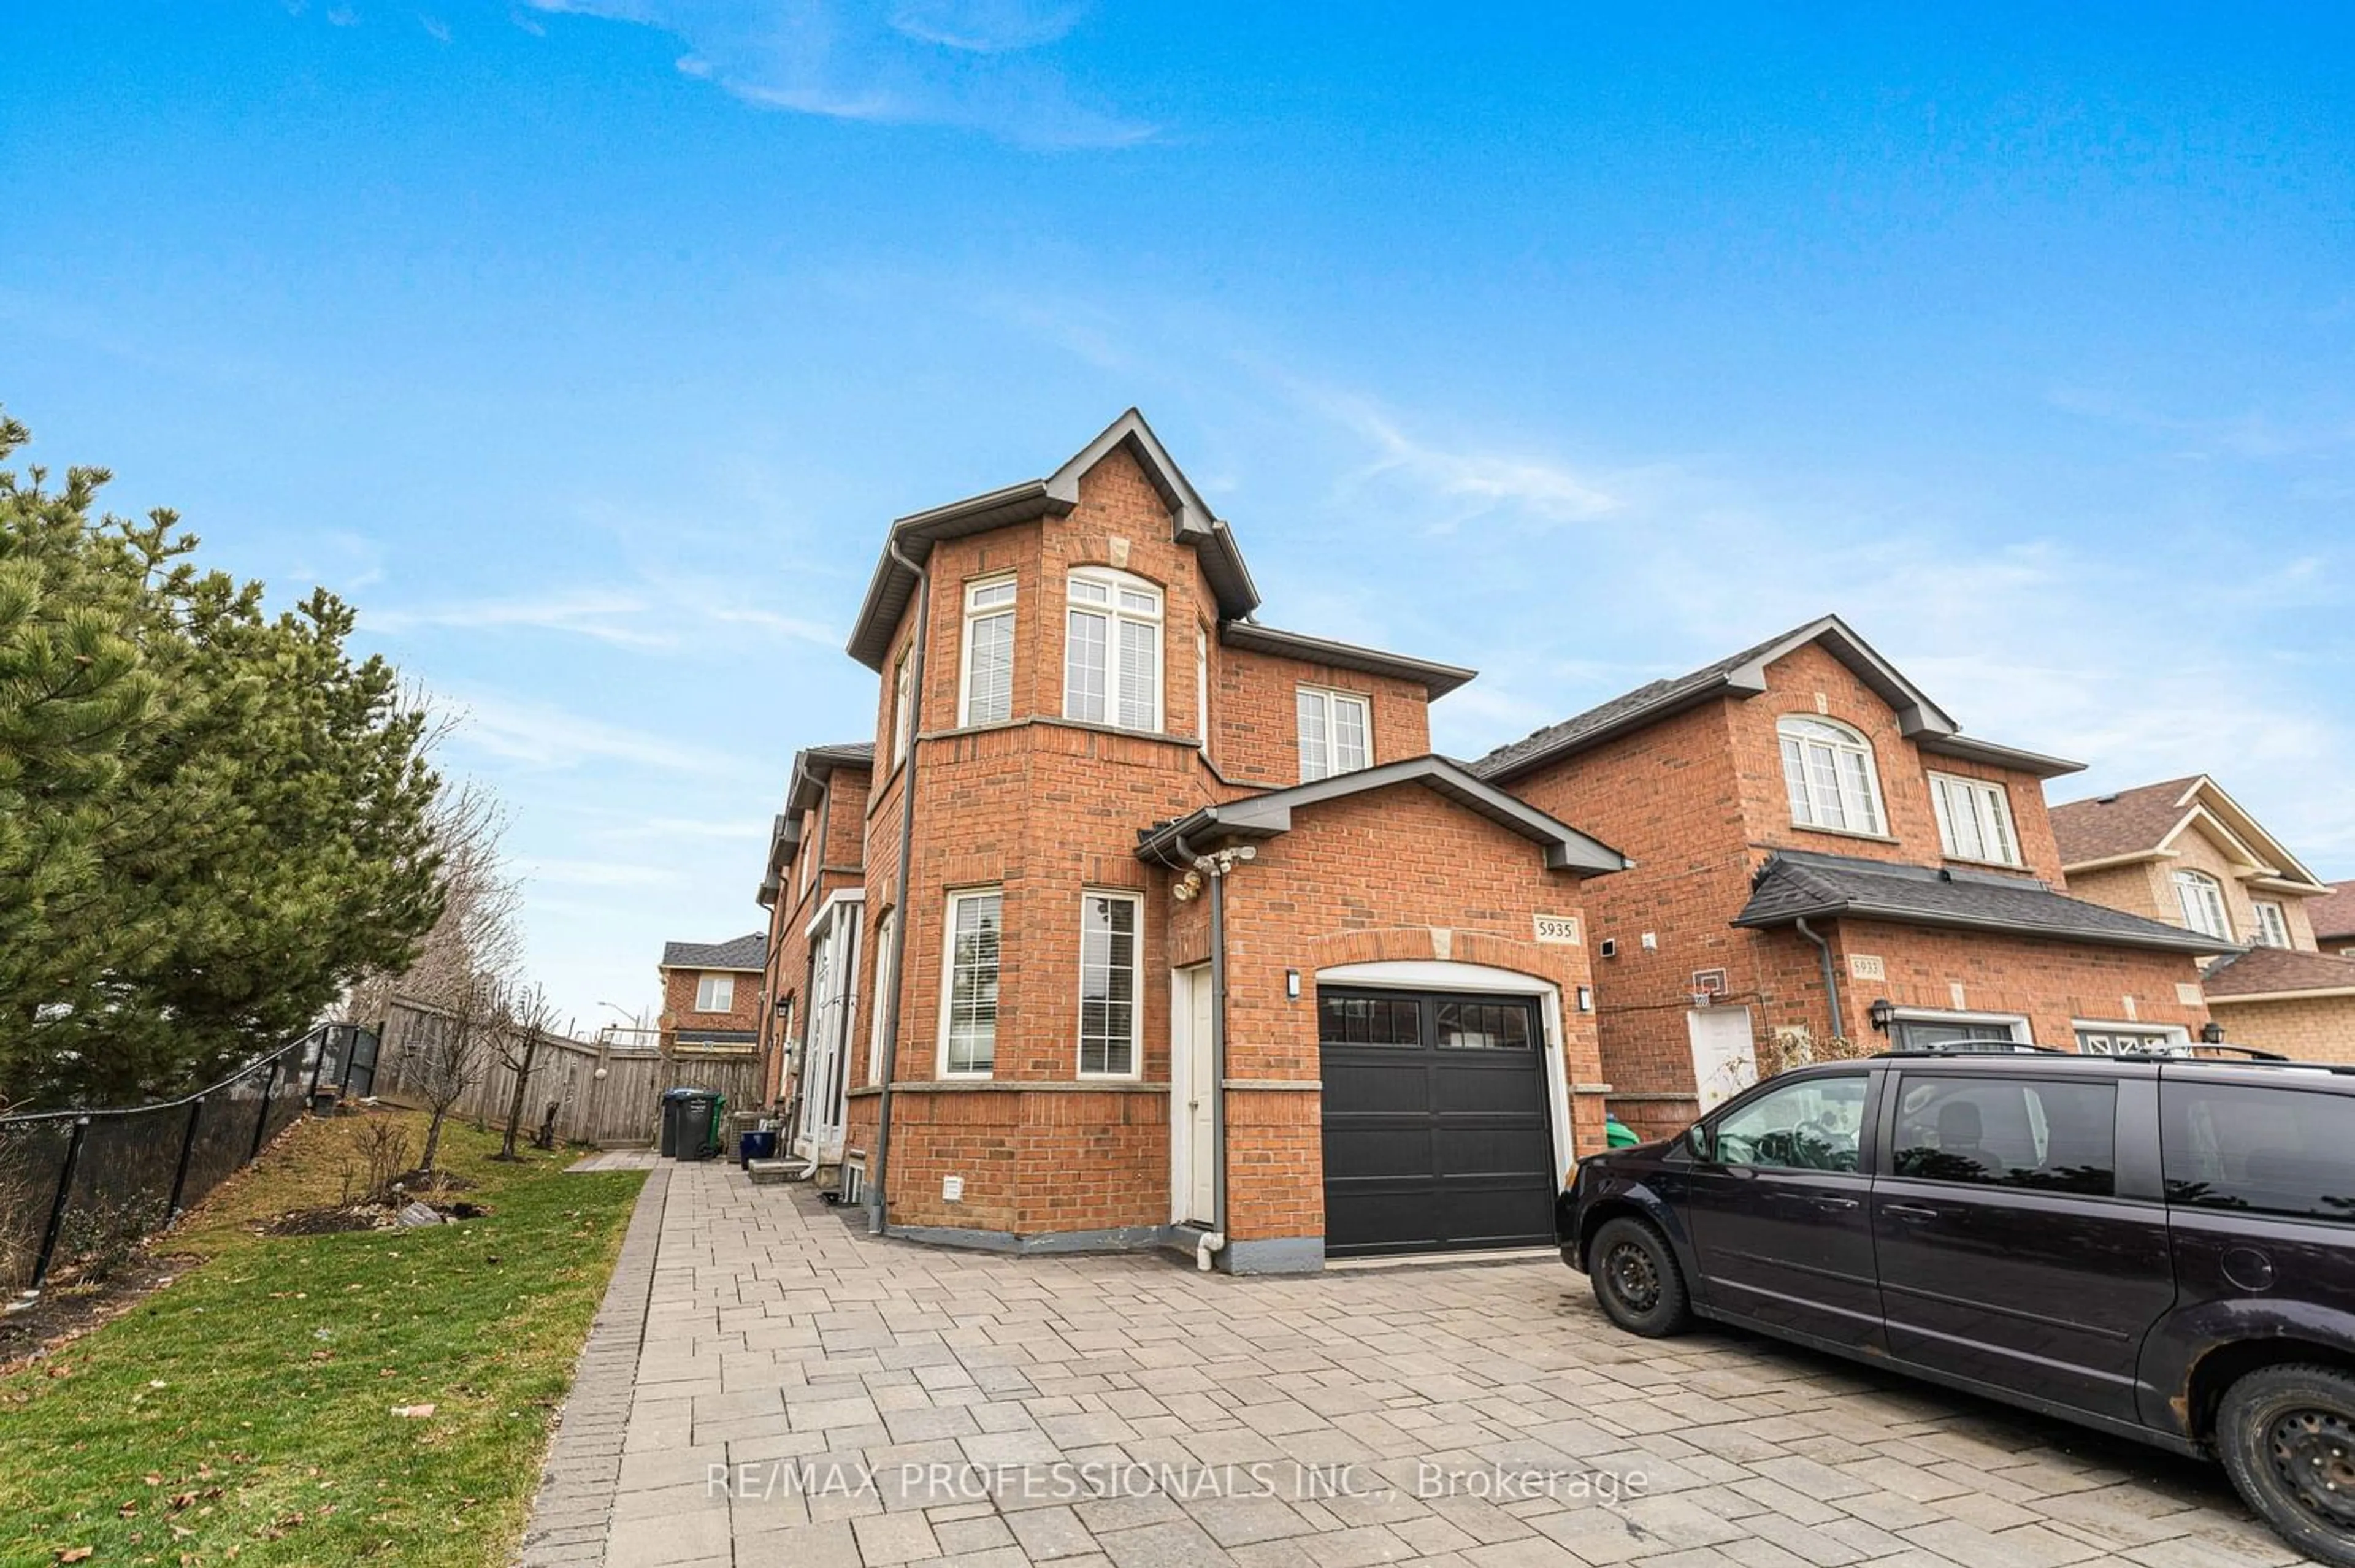 Home with brick exterior material for 5935 Stonebriar Cres, Mississauga Ontario L5V 2T8